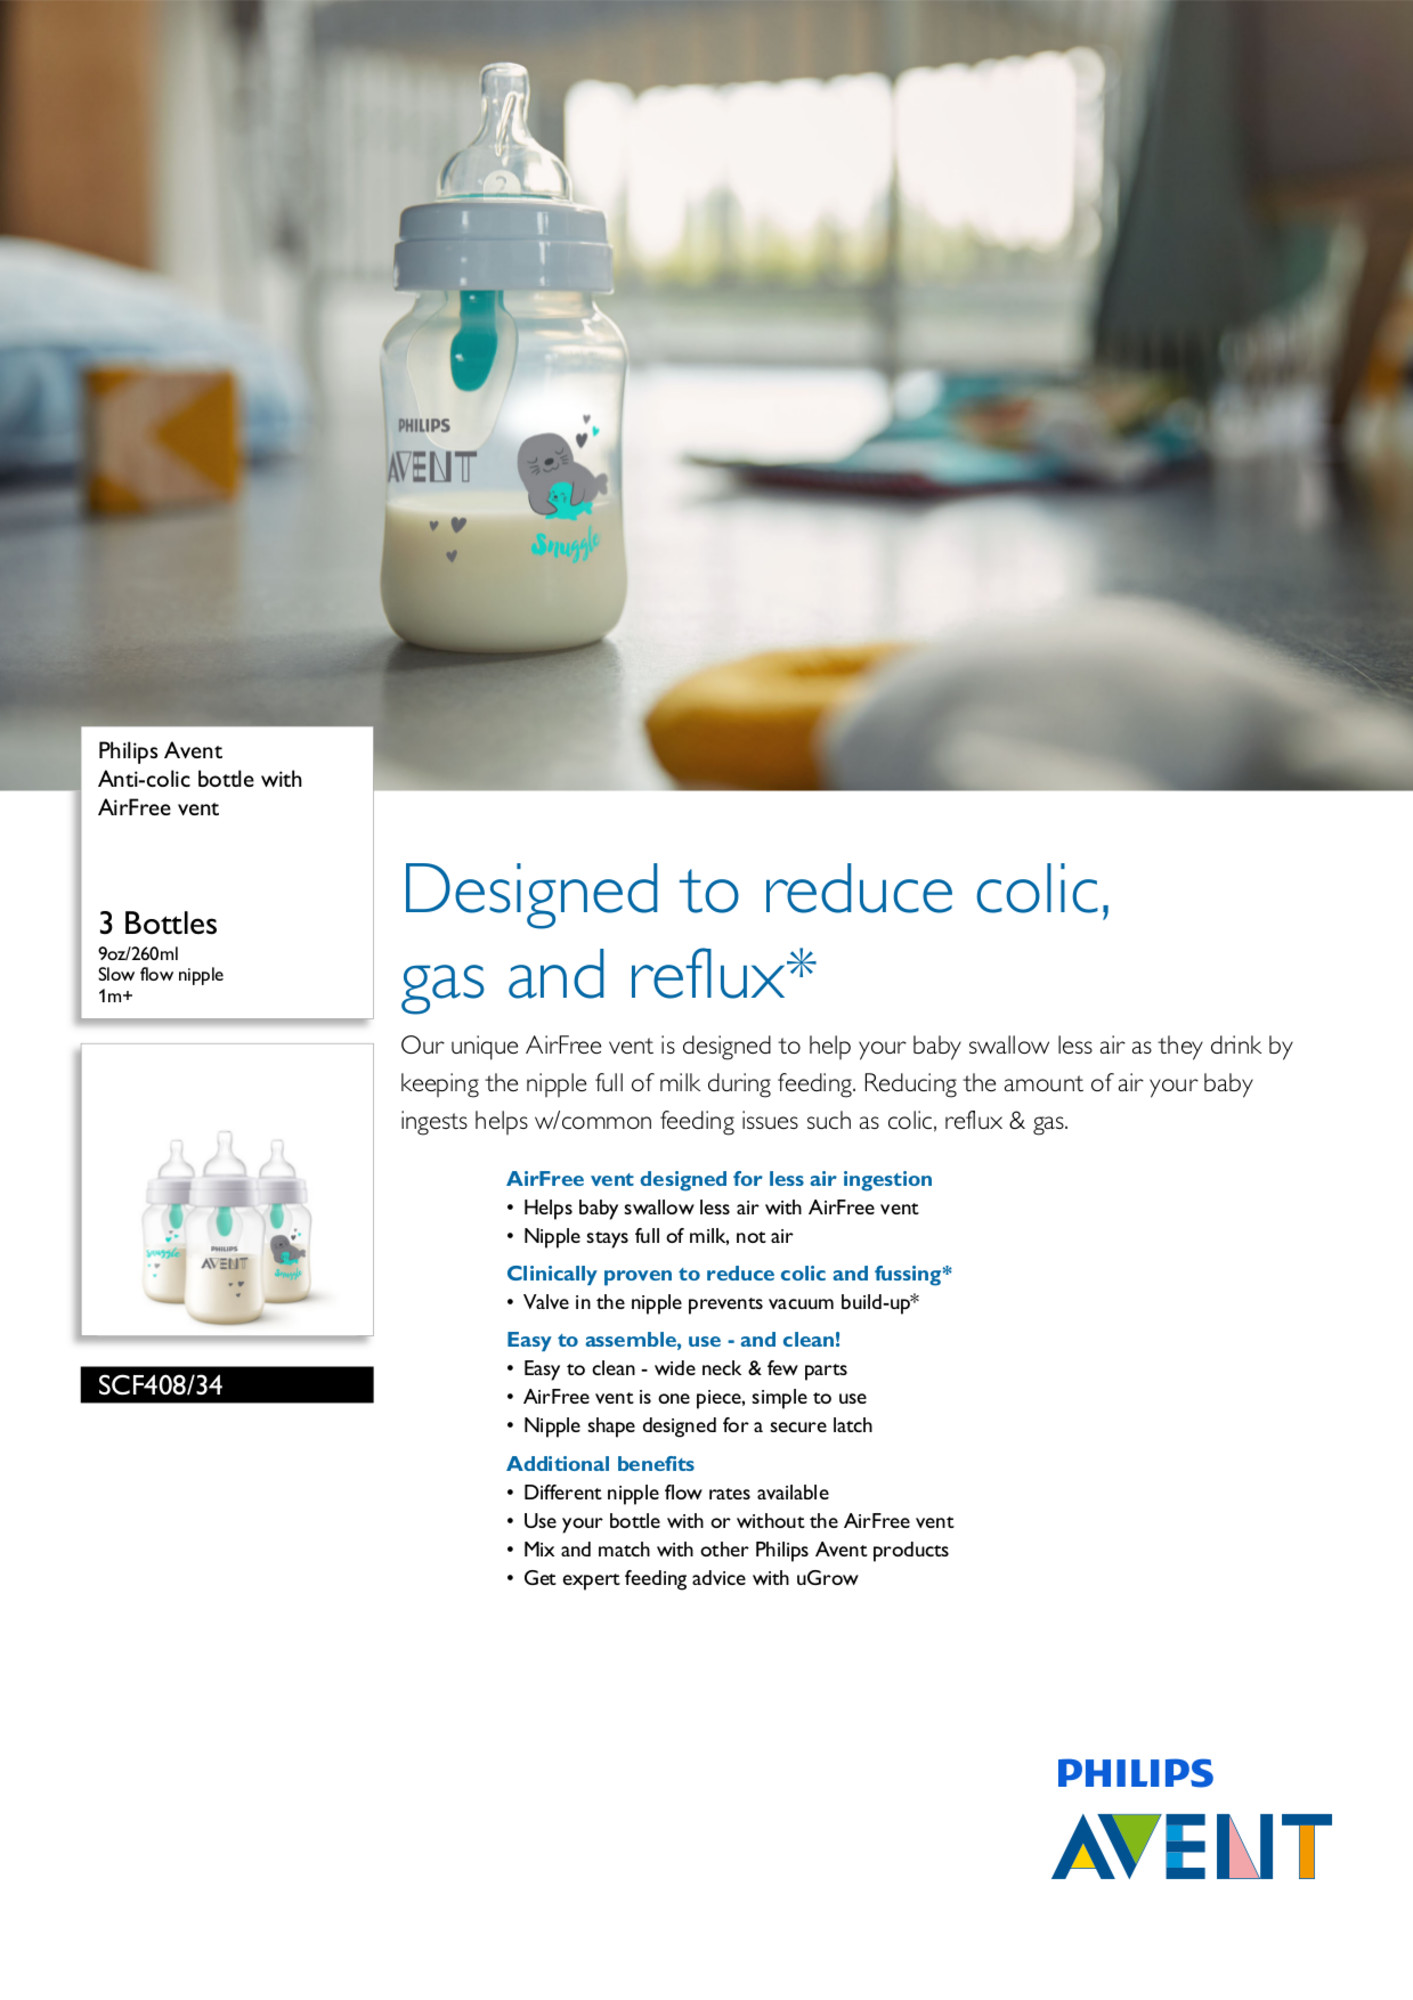 Philips Avent Anti-colic Baby Bottle with AirFree Vent with Seal Design, 9oz, 3pk, SCF408/34 - image 2 of 6